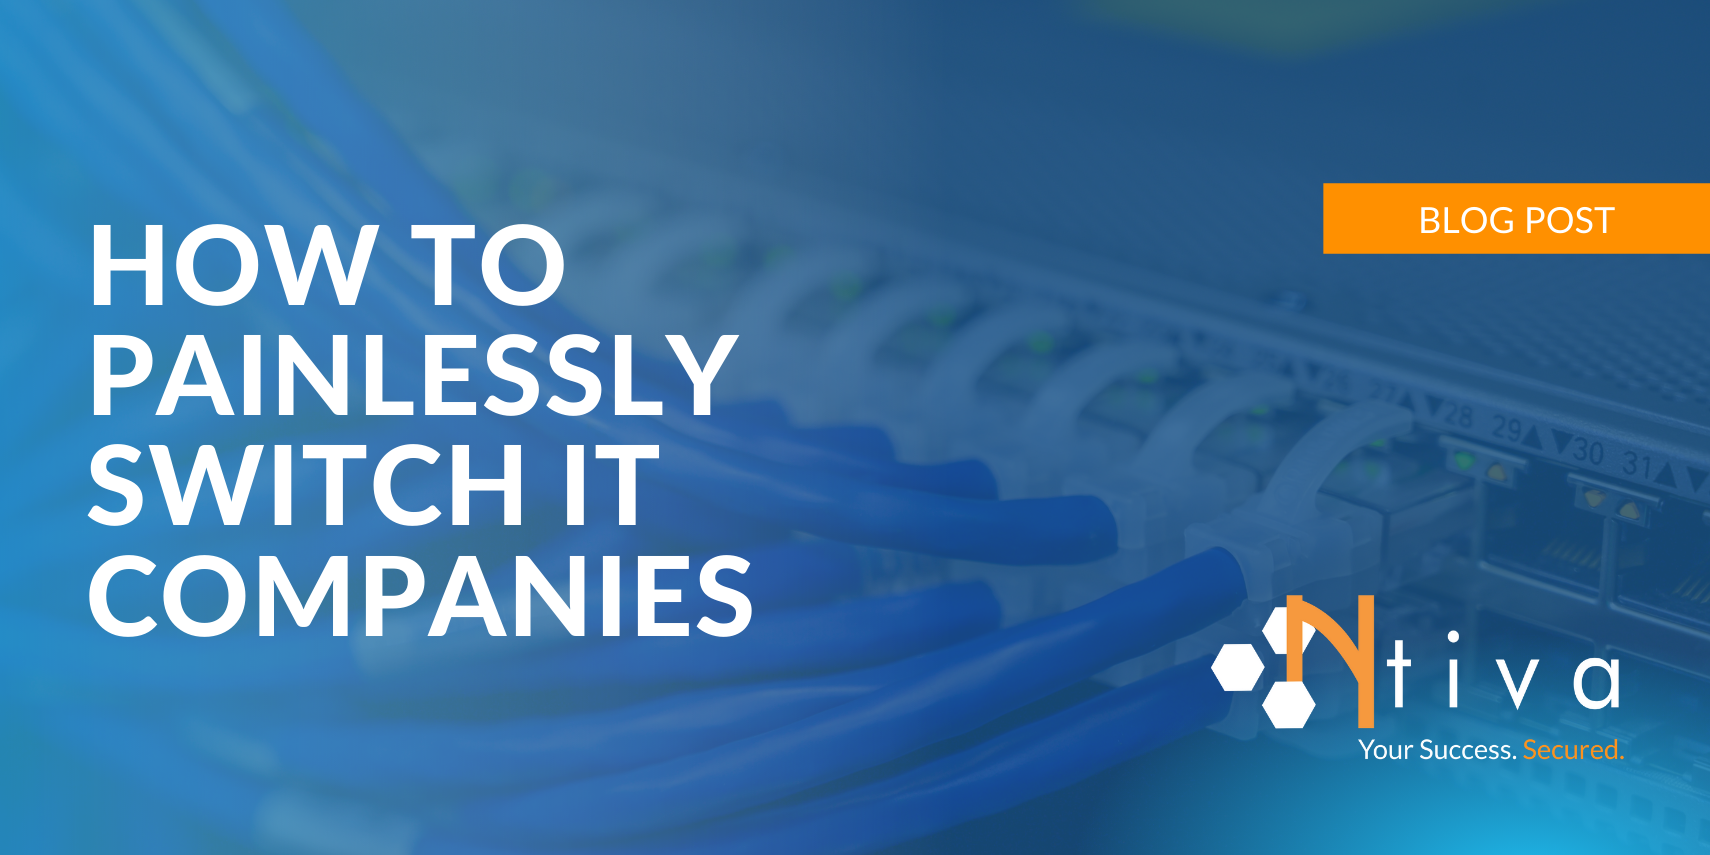 How to Switch IT Companies Painlessly (Really!) in 4 Steps